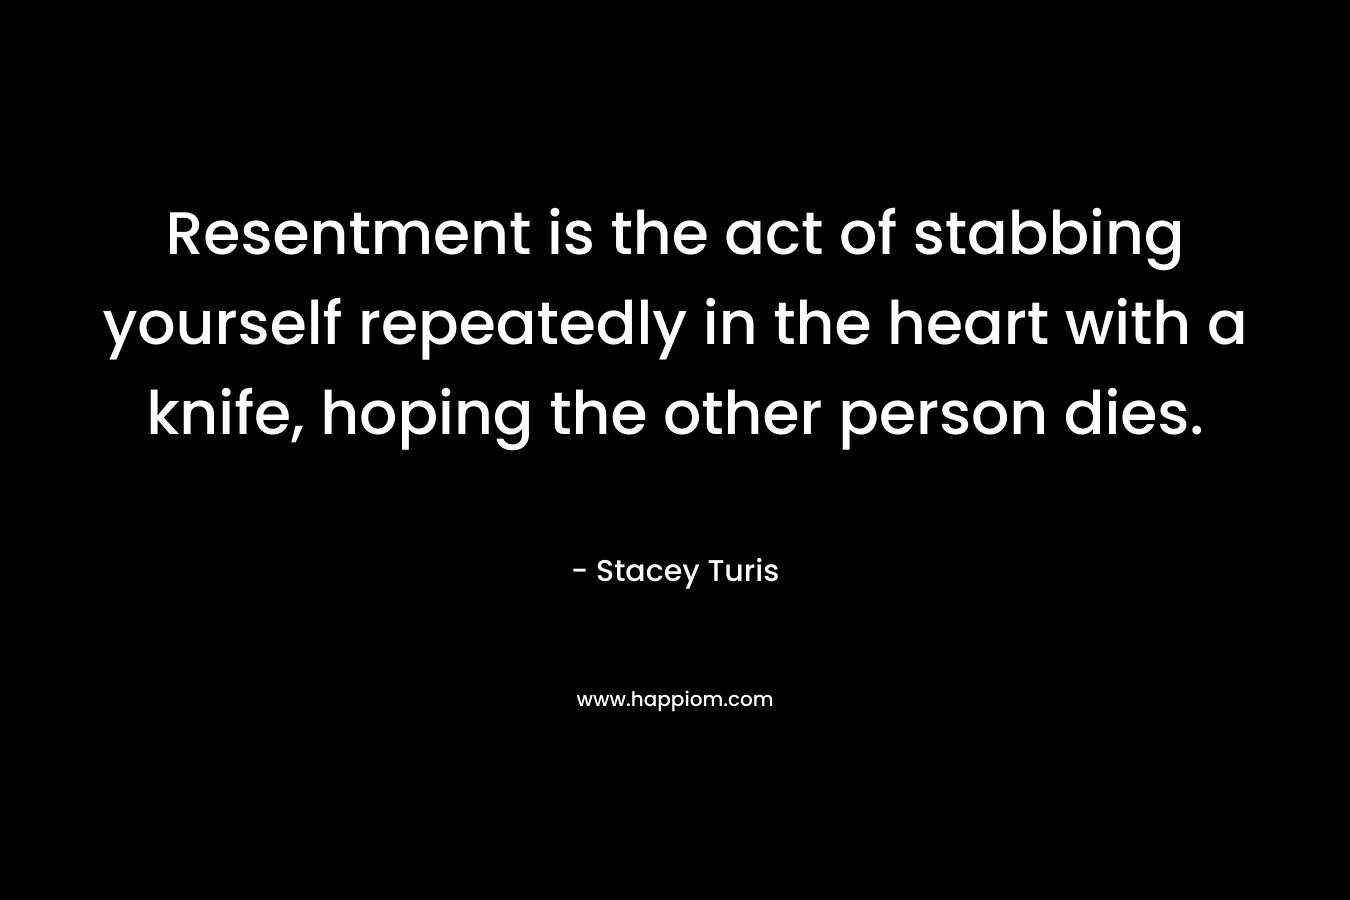 Resentment is the act of stabbing yourself repeatedly in the heart with a knife, hoping the other person dies.